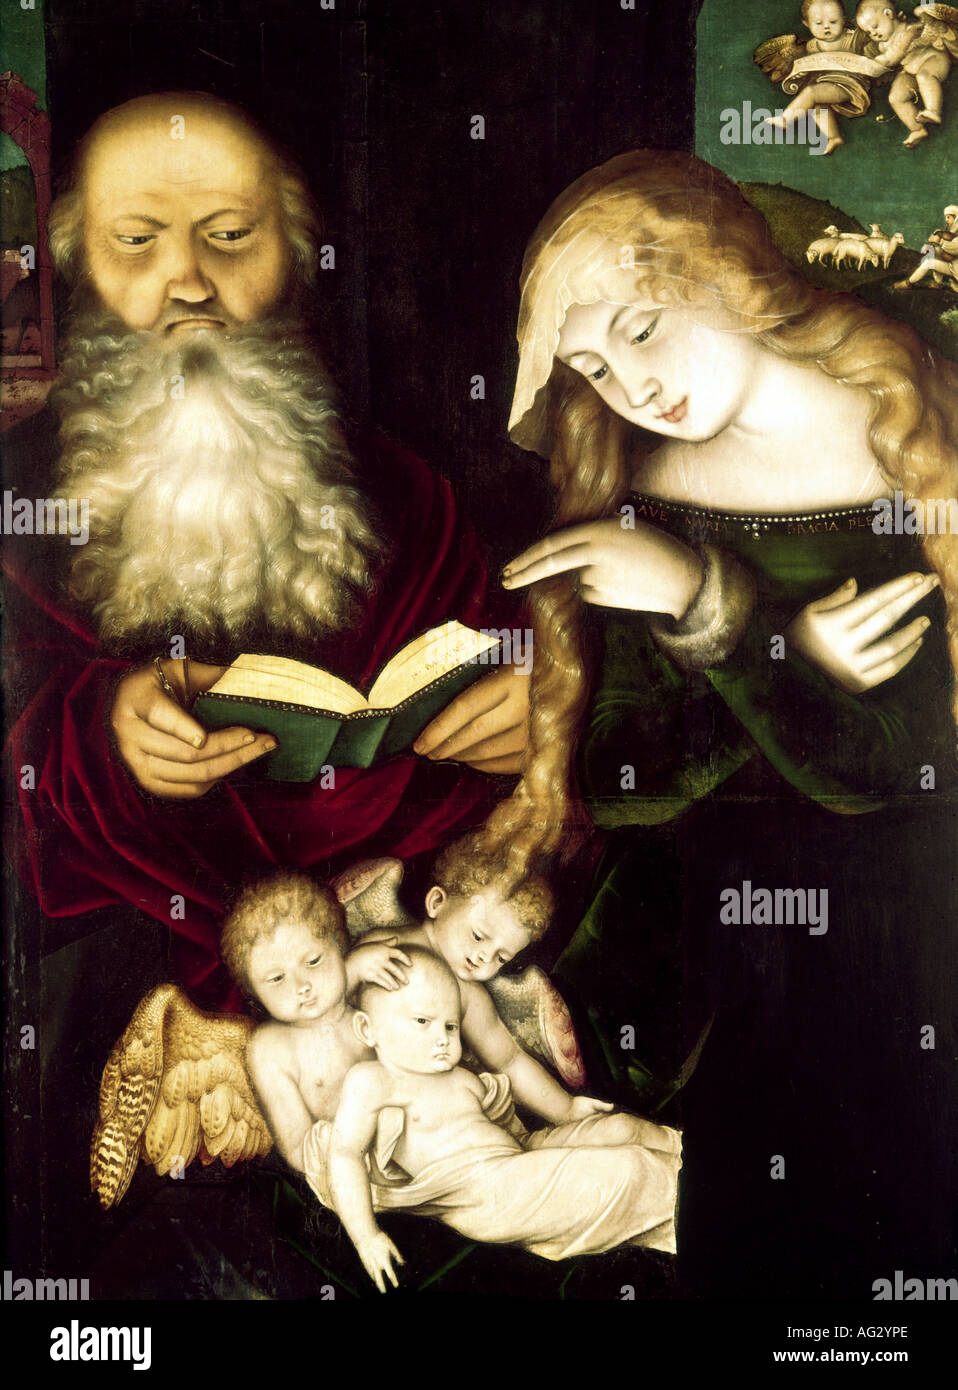 fine arts, Baldung Grien, Hans, (1484 / 1485 - 1545), painting, 'Die Geburt Christi', 'Birth of Christ', 1539, wood, 103 cm x 78 cm, state gallery, Karlsruhe, Germany, Artist's Copyright has not to be cleared Stock Photo